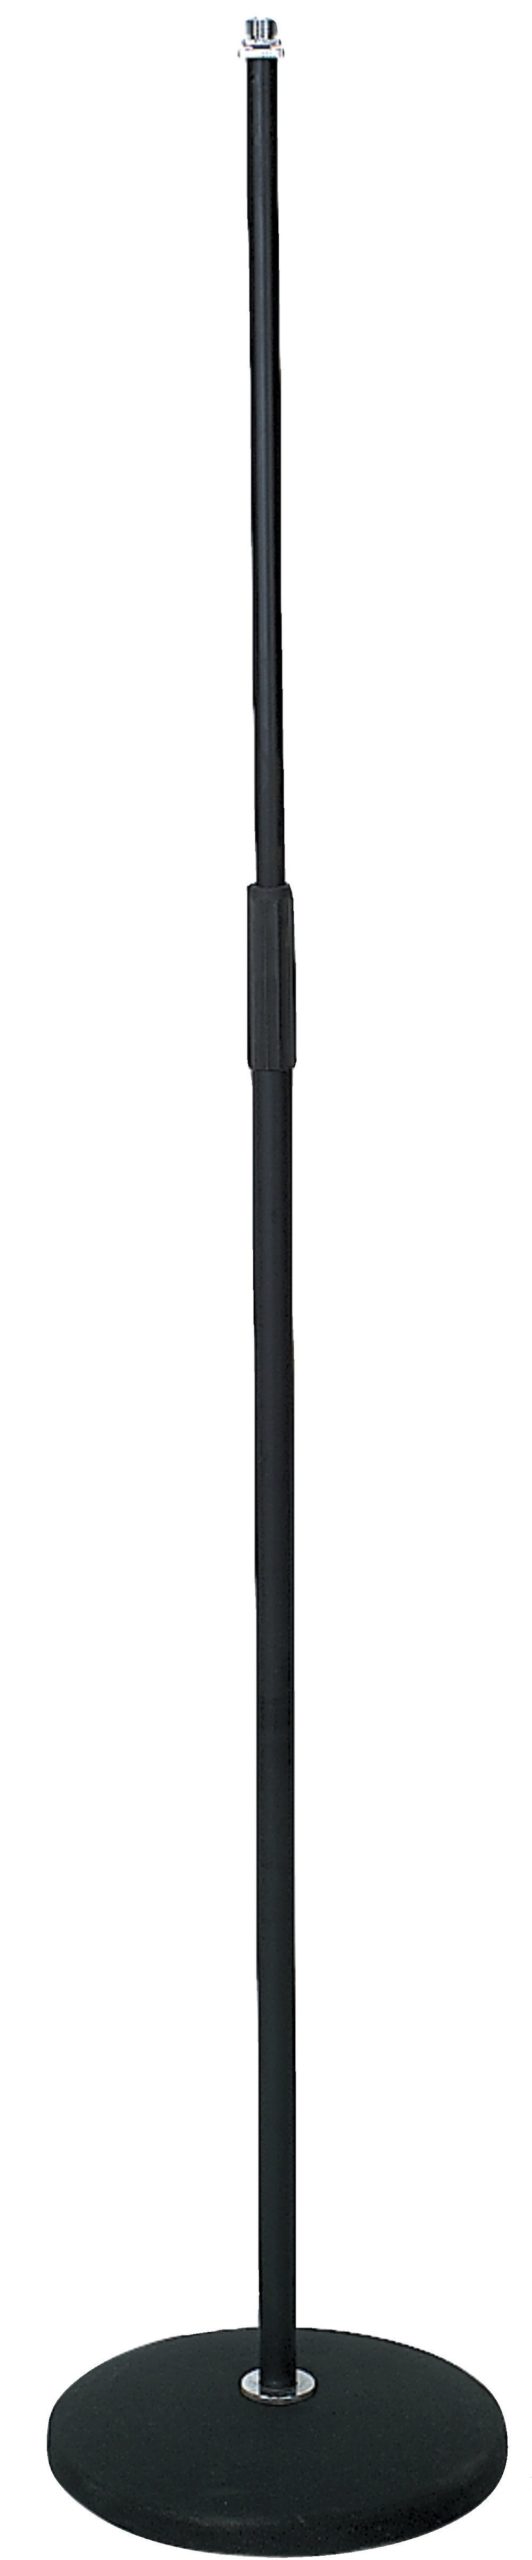 Microphone stand VE6 black